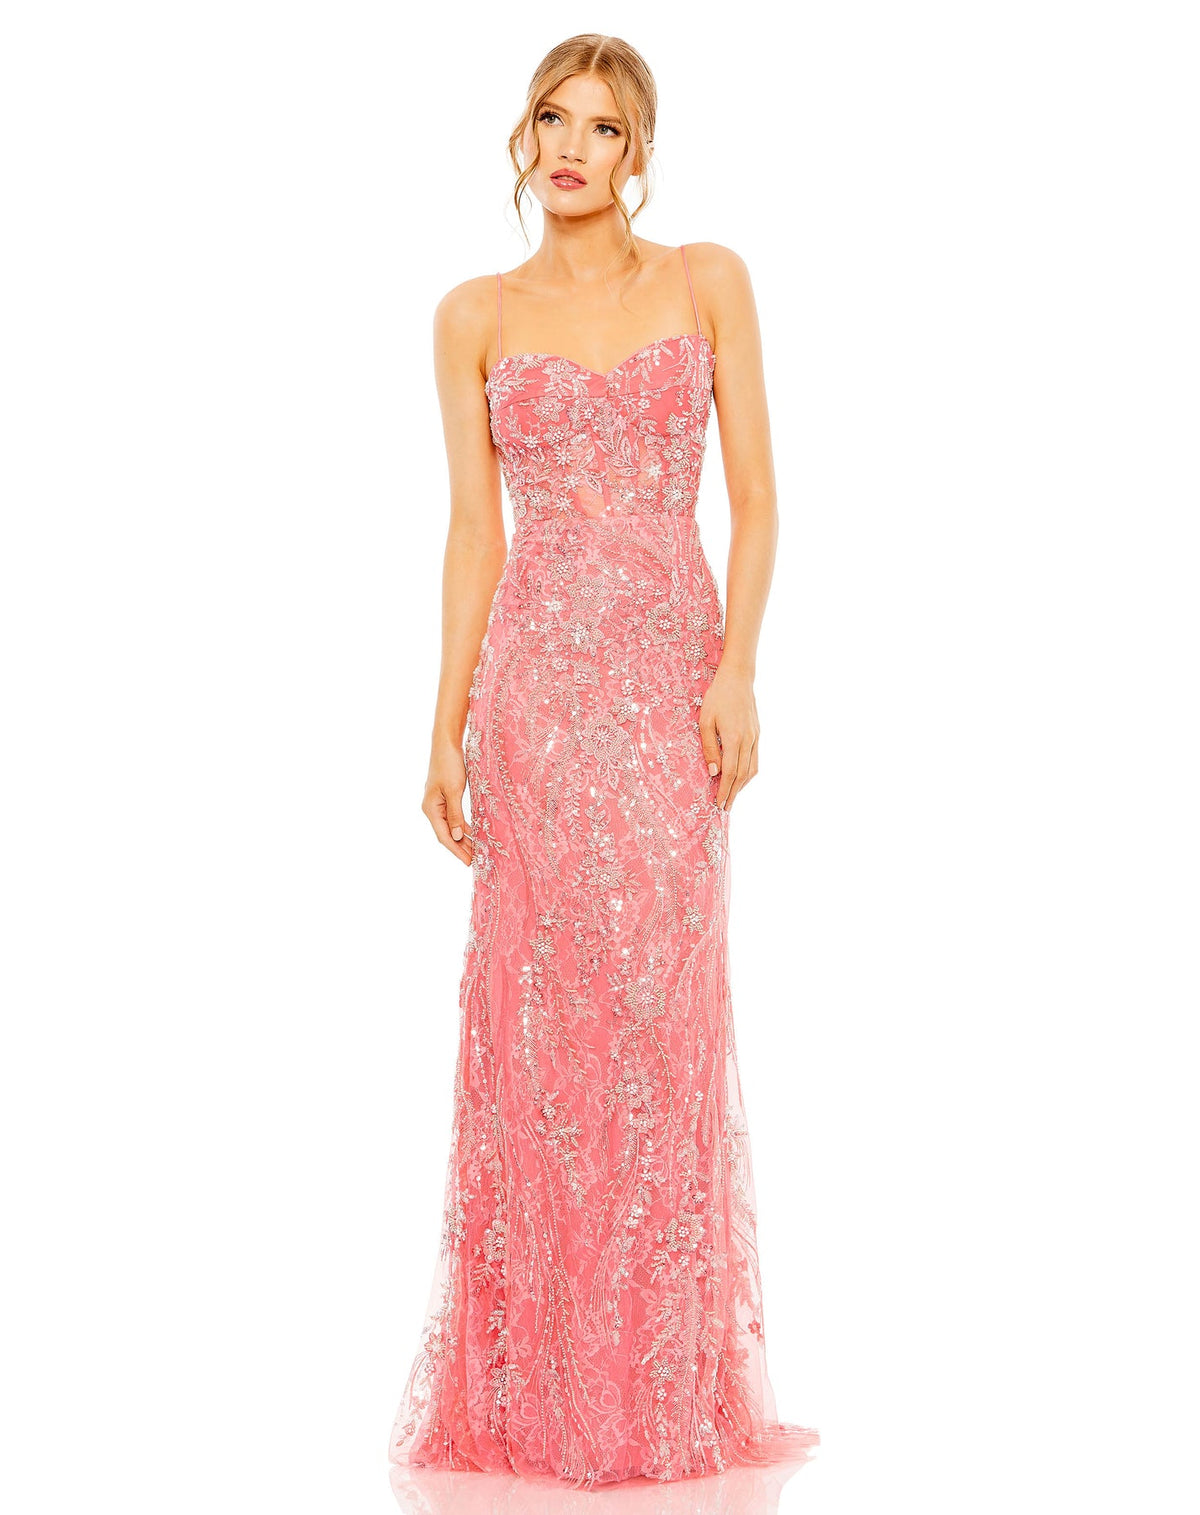 Sweetheart sleeveless embellished gown - Coral